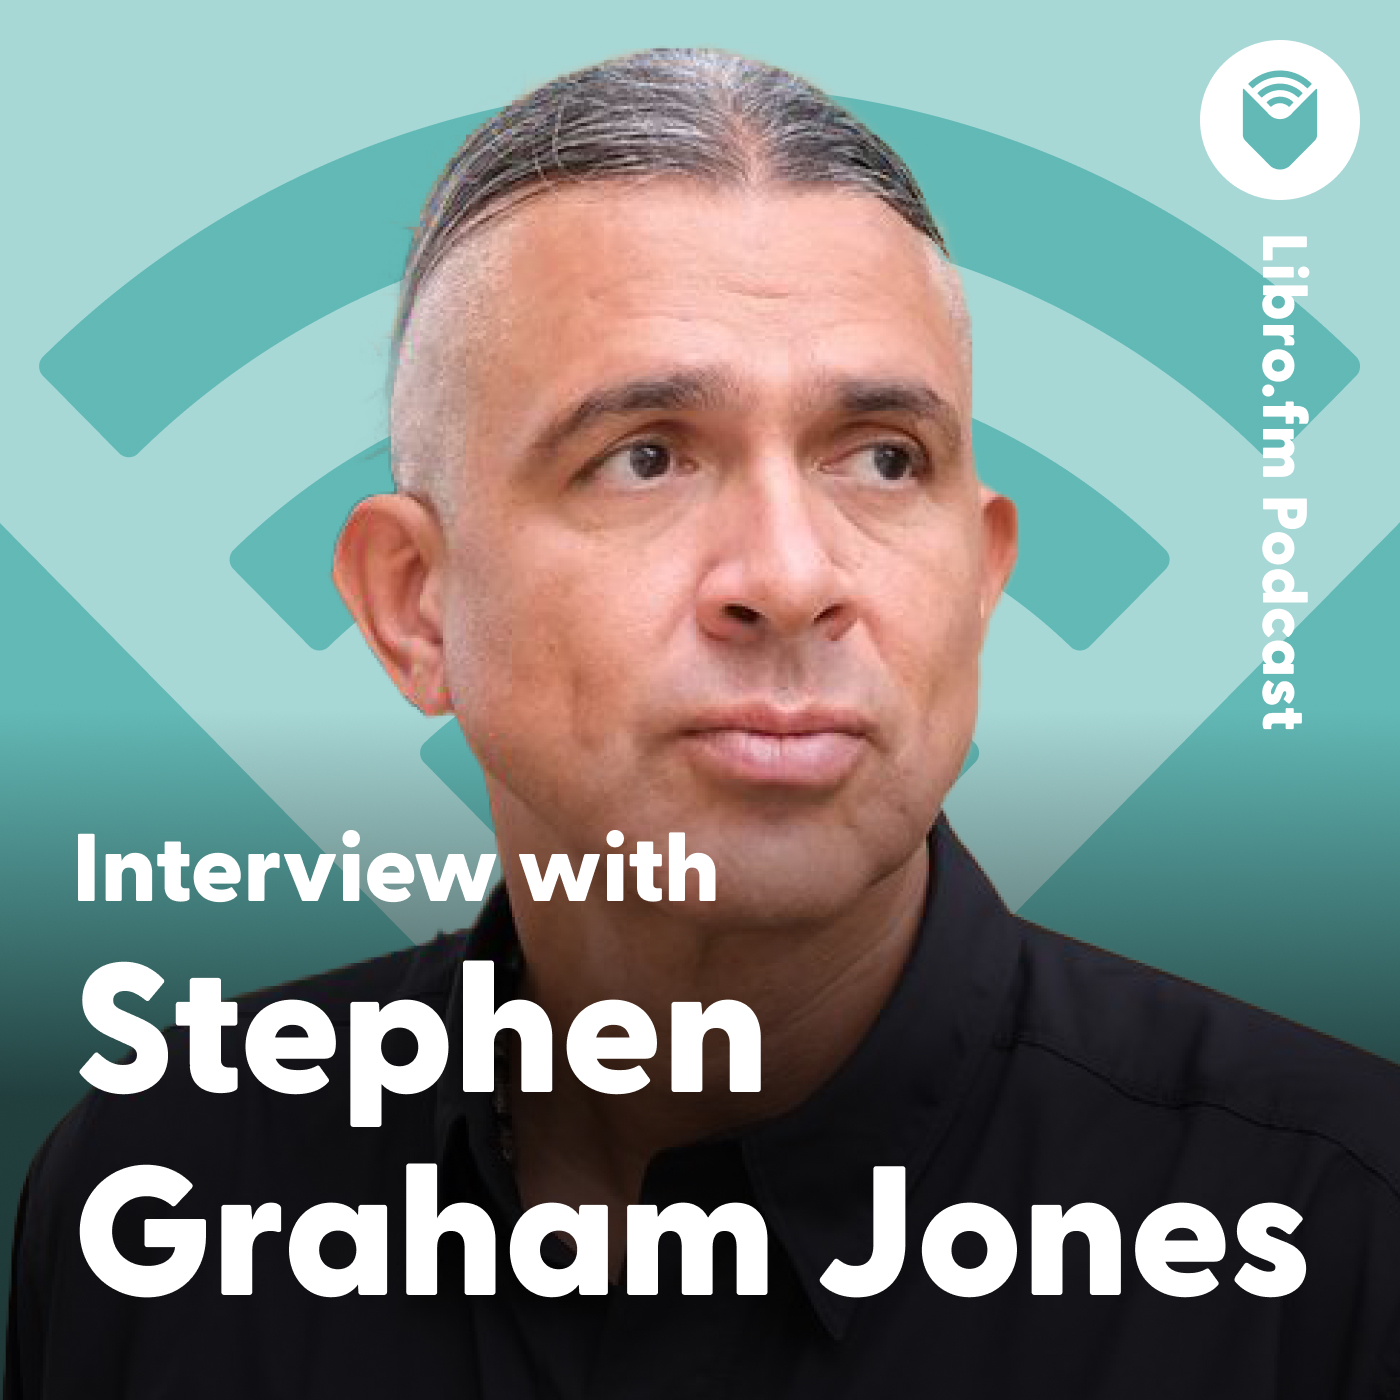 A headshot of Stephan Graham Jones on a teal background showing the Libro.fm logo. Text reads: “Libro.fm Podcast: Interview with Stephan Graham Jones."